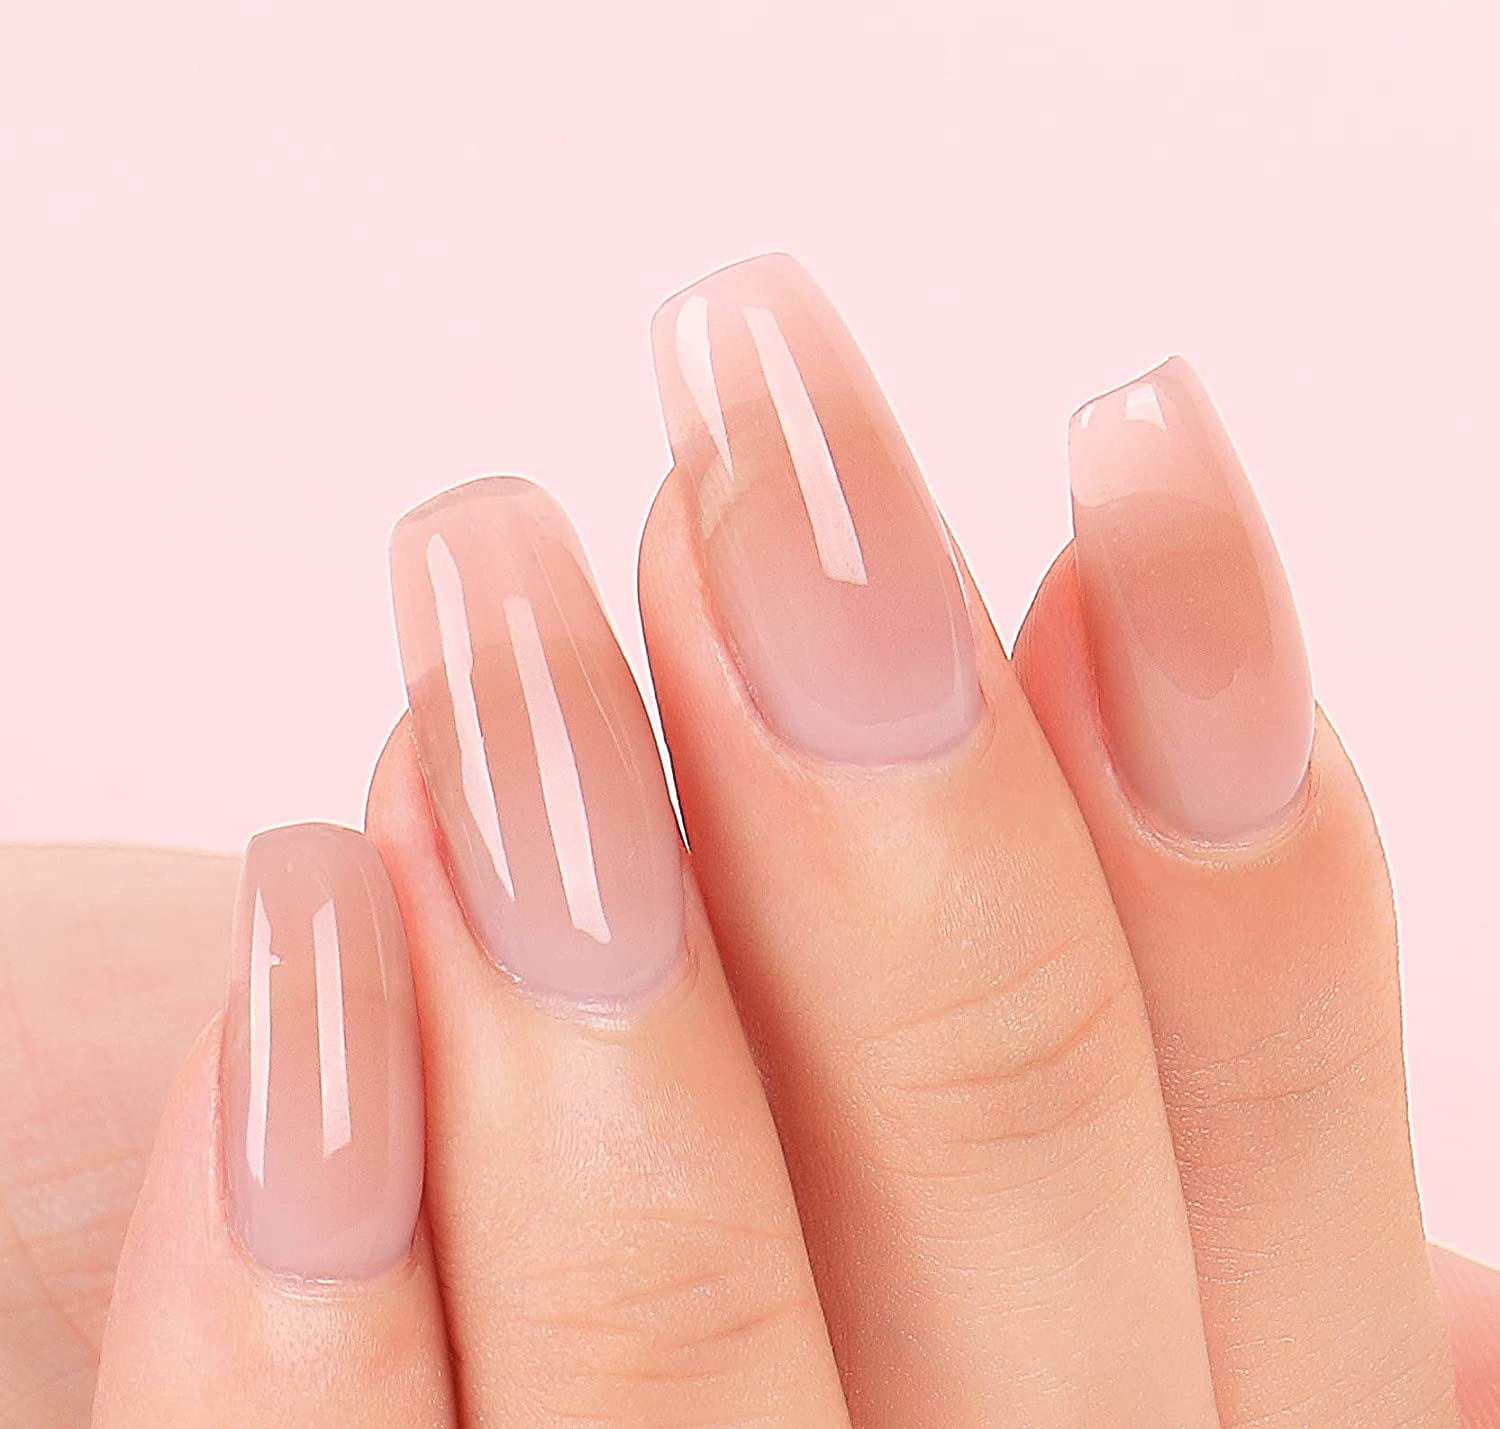 We Nails Dubai - GEL-X If you love having long nails with no damage on your natural  nails trying our GEL-X soak-off soft gel nail extension system is a must.  Differences between